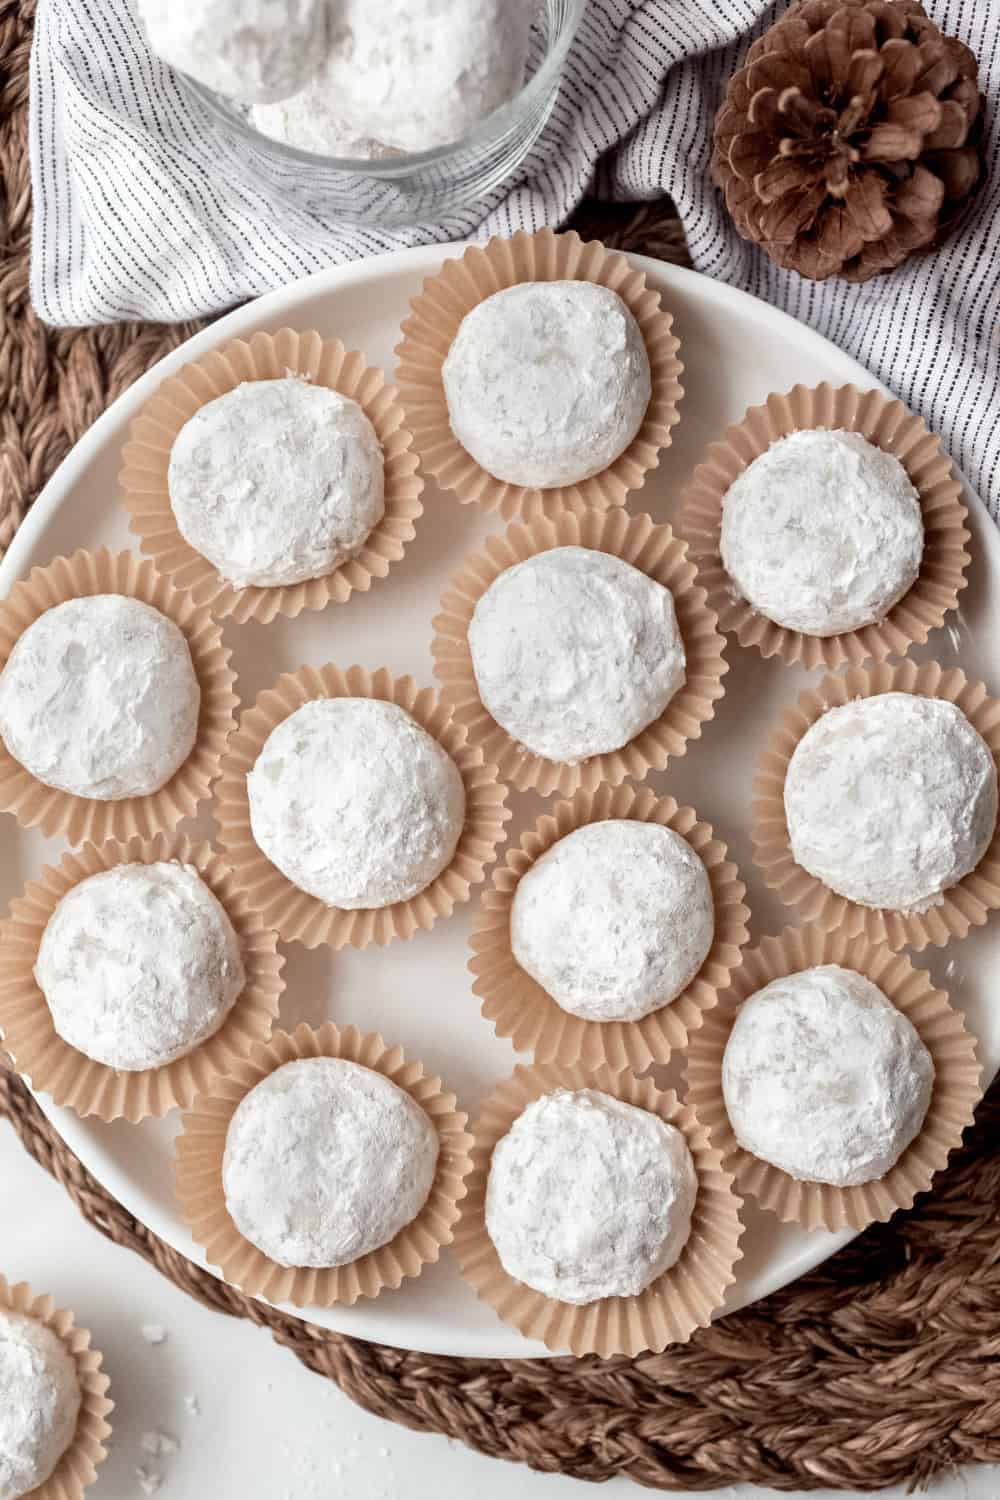 Snowball cookies in paper liners arranged on a white platter